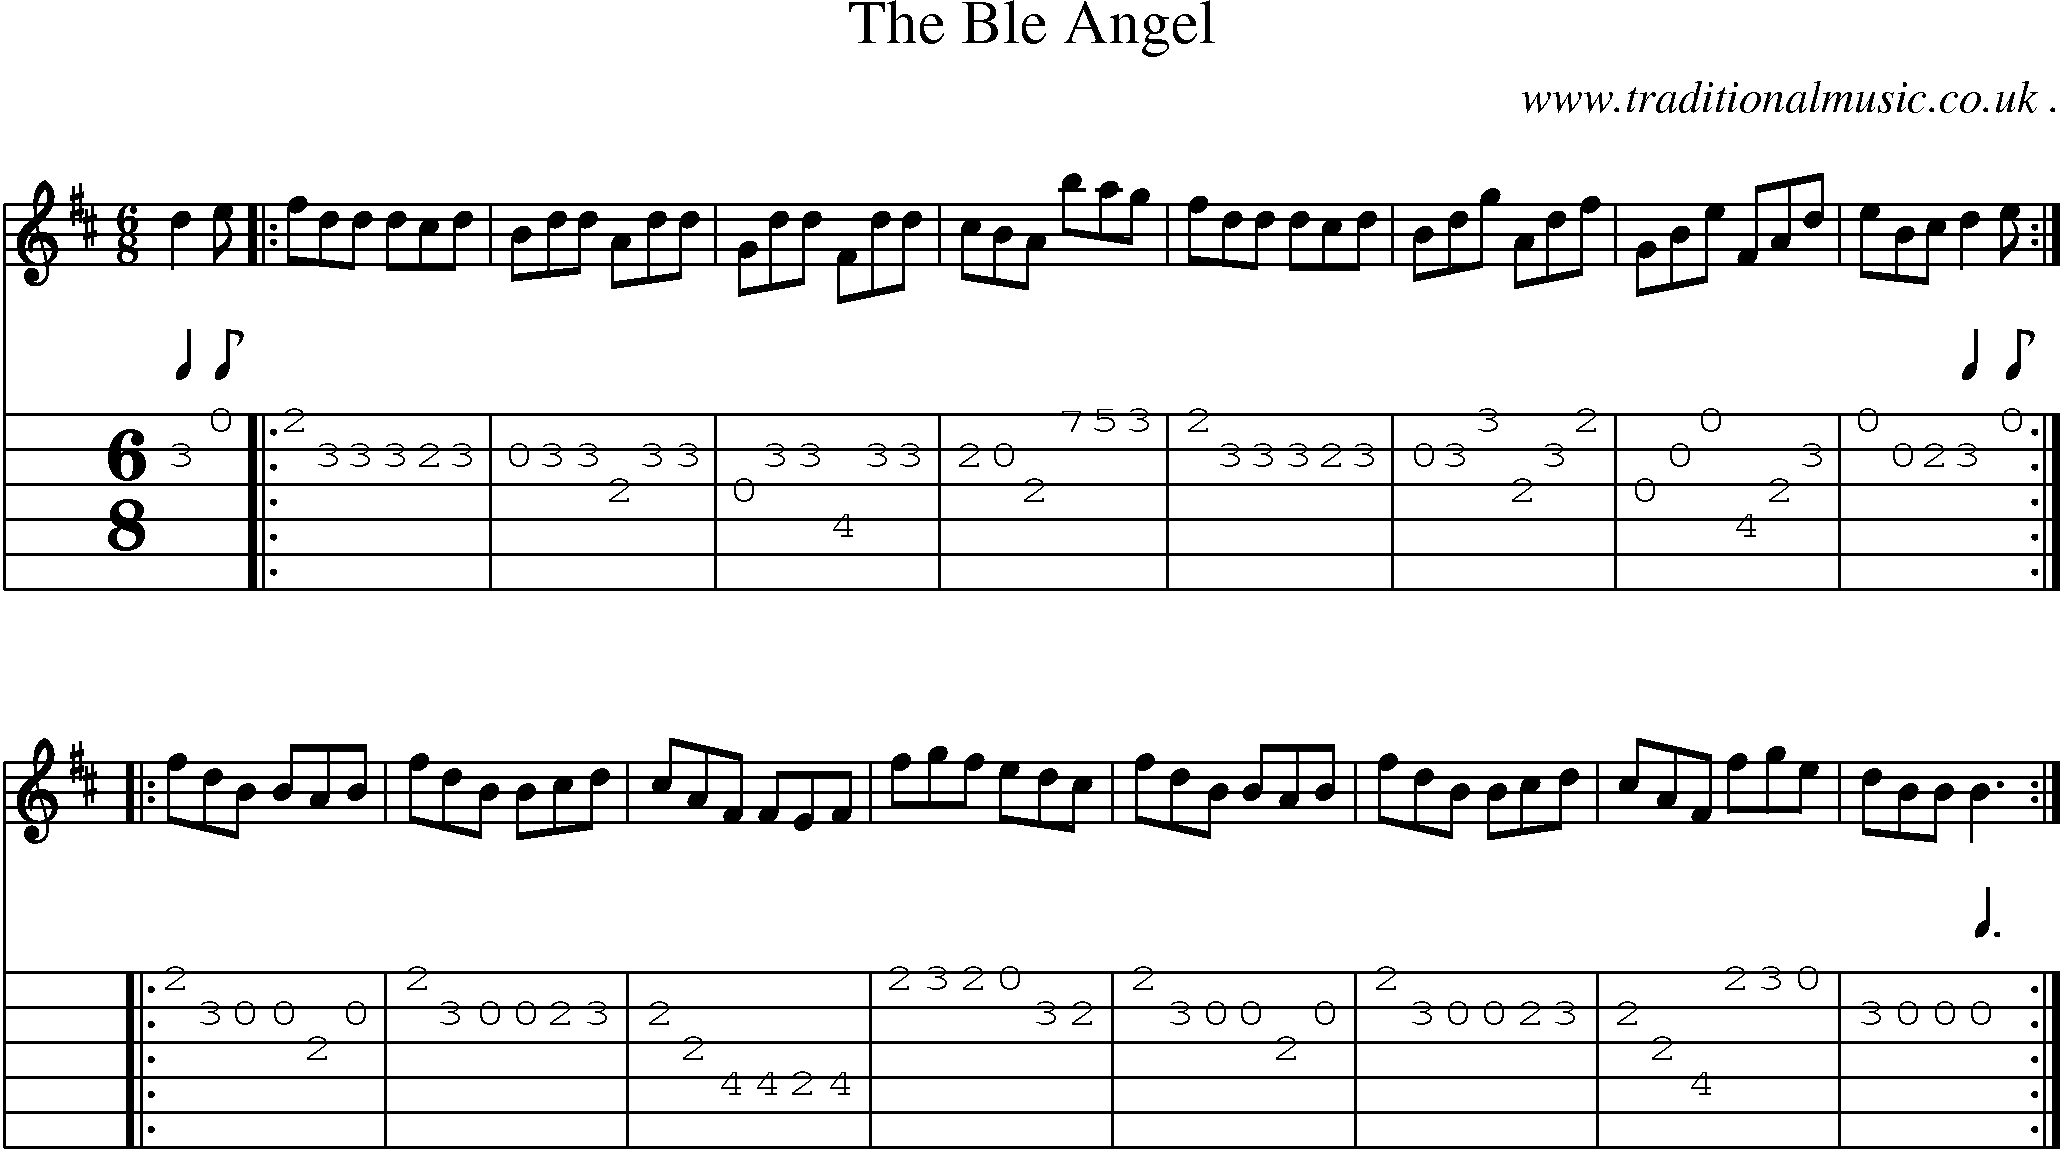 Sheet-Music and Guitar Tabs for The Ble Angel